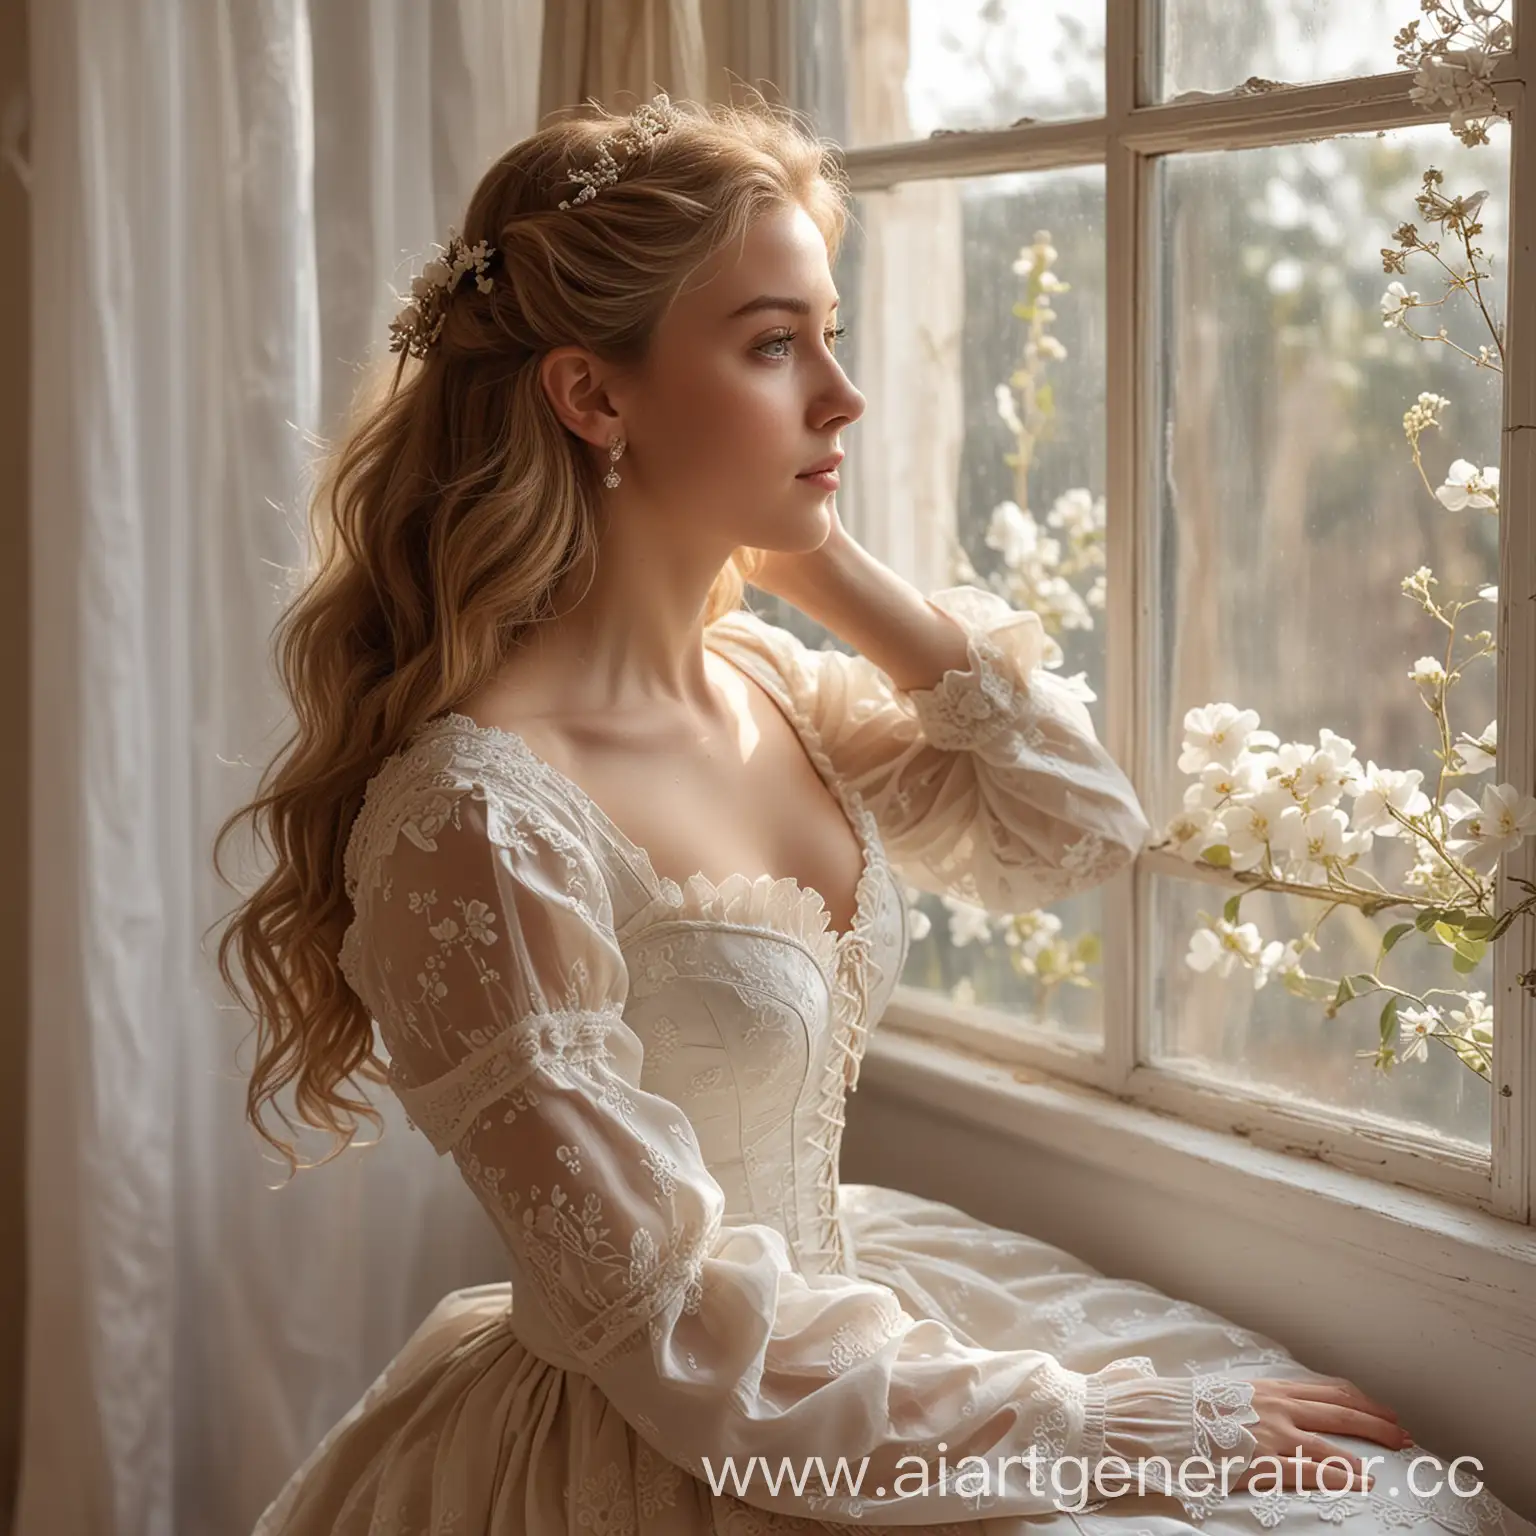 Girl-Sitting-by-Window-in-Romantic-Atmosphere-with-Flowers